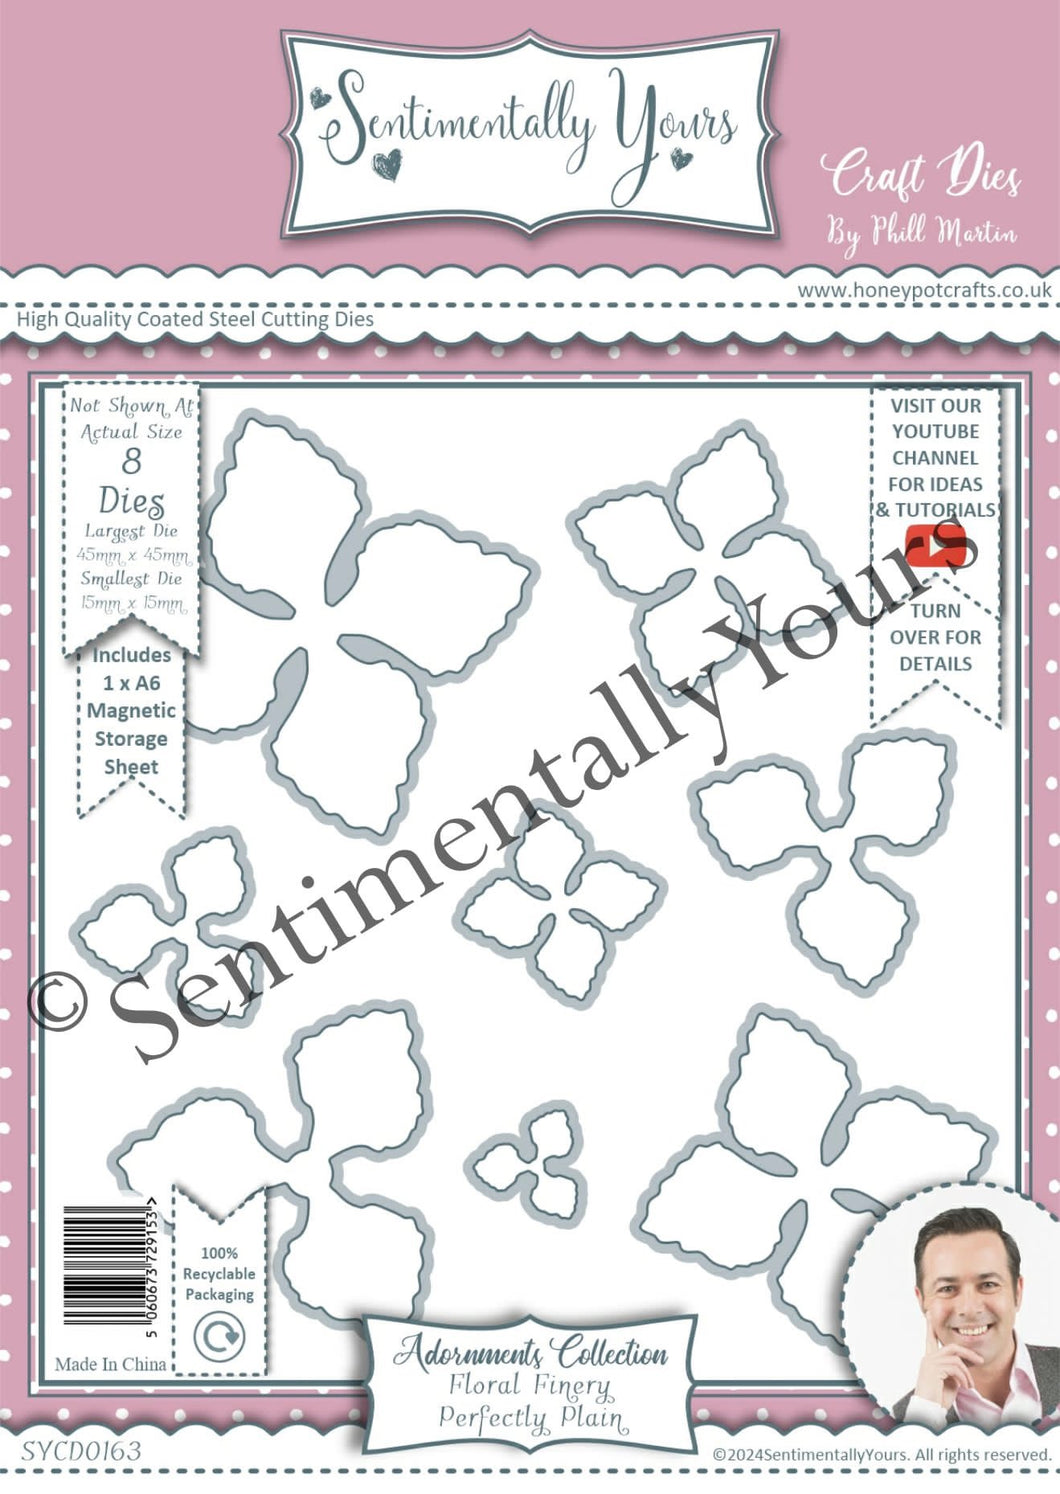 Phill Martin Sentimentally Yours Adornments Collection - Floral Finery Perfectly Plain